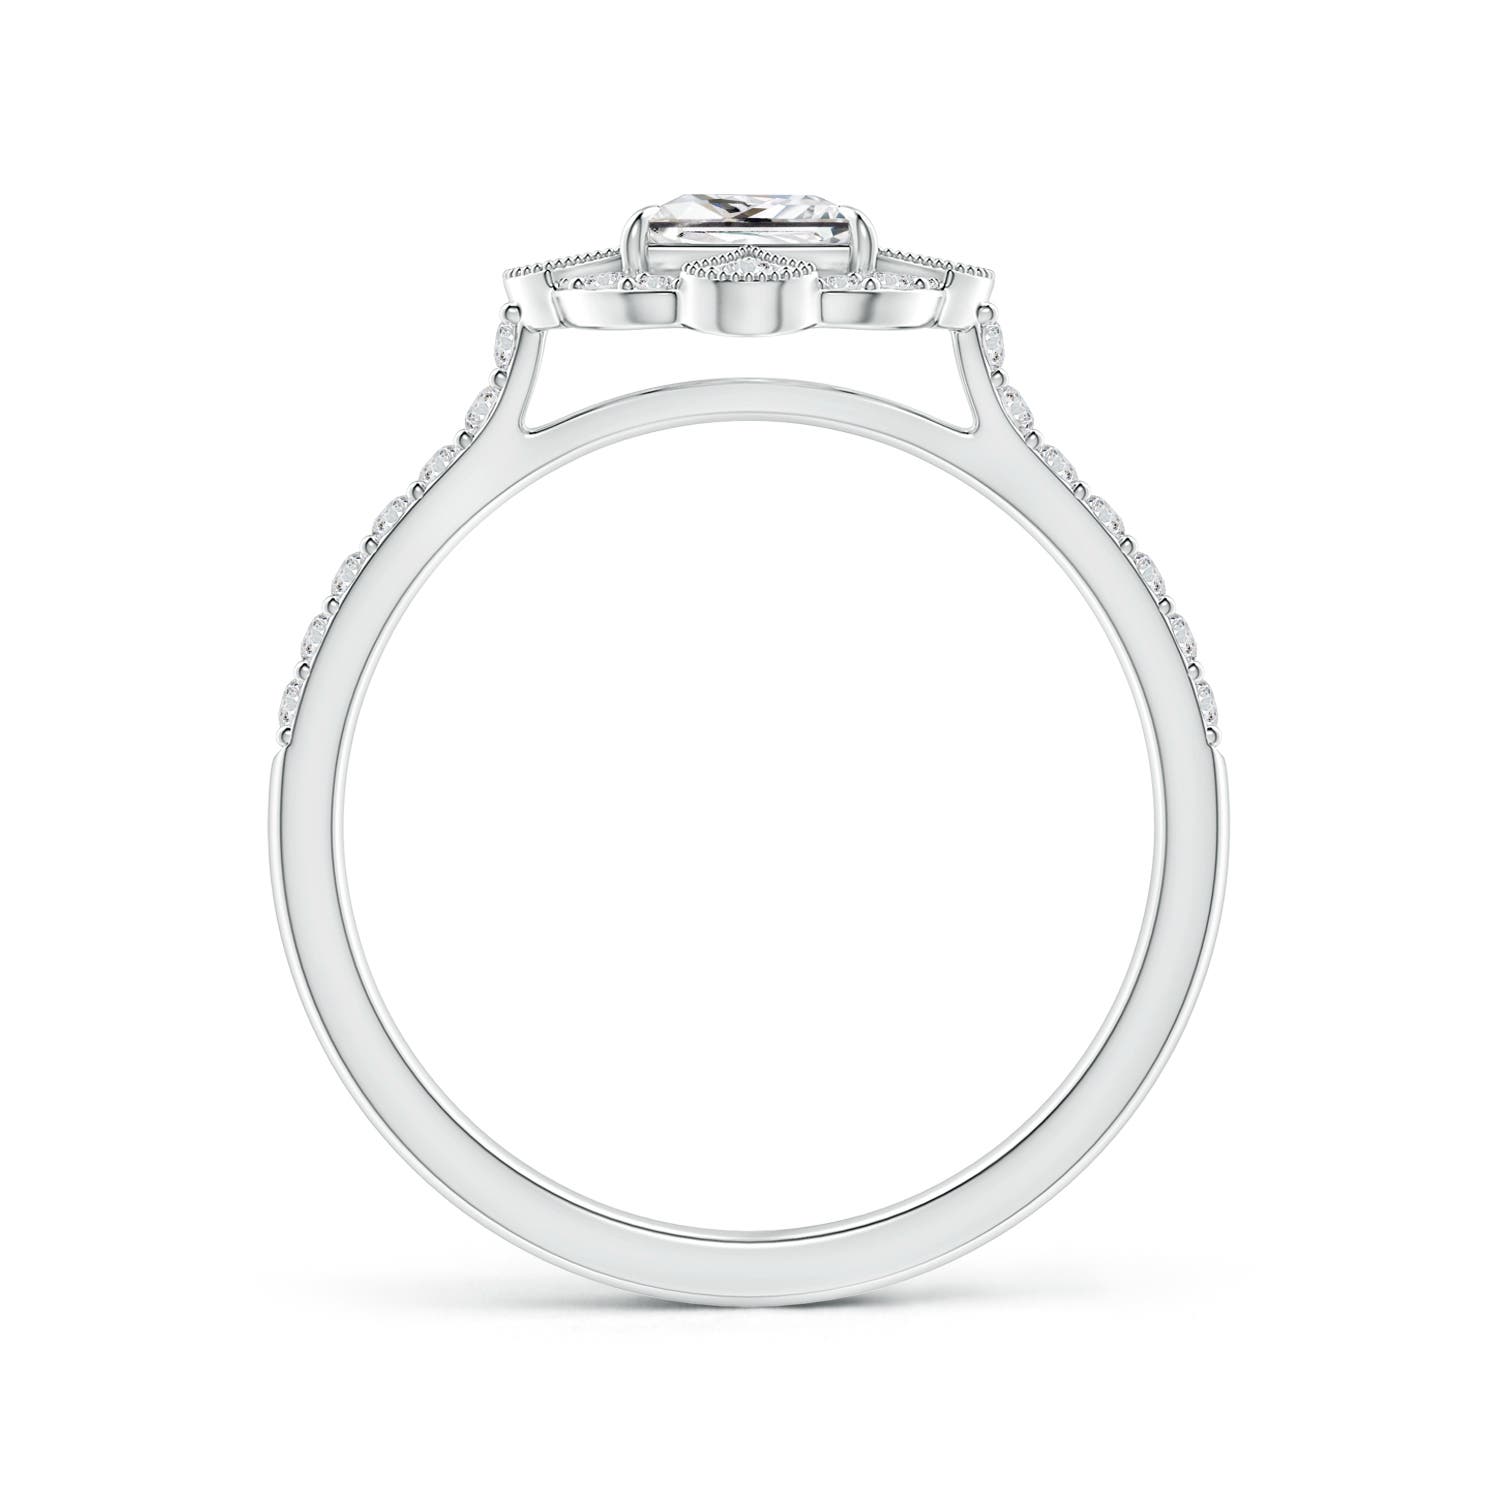 H, SI2 / 0.9 CT / 14 KT White Gold